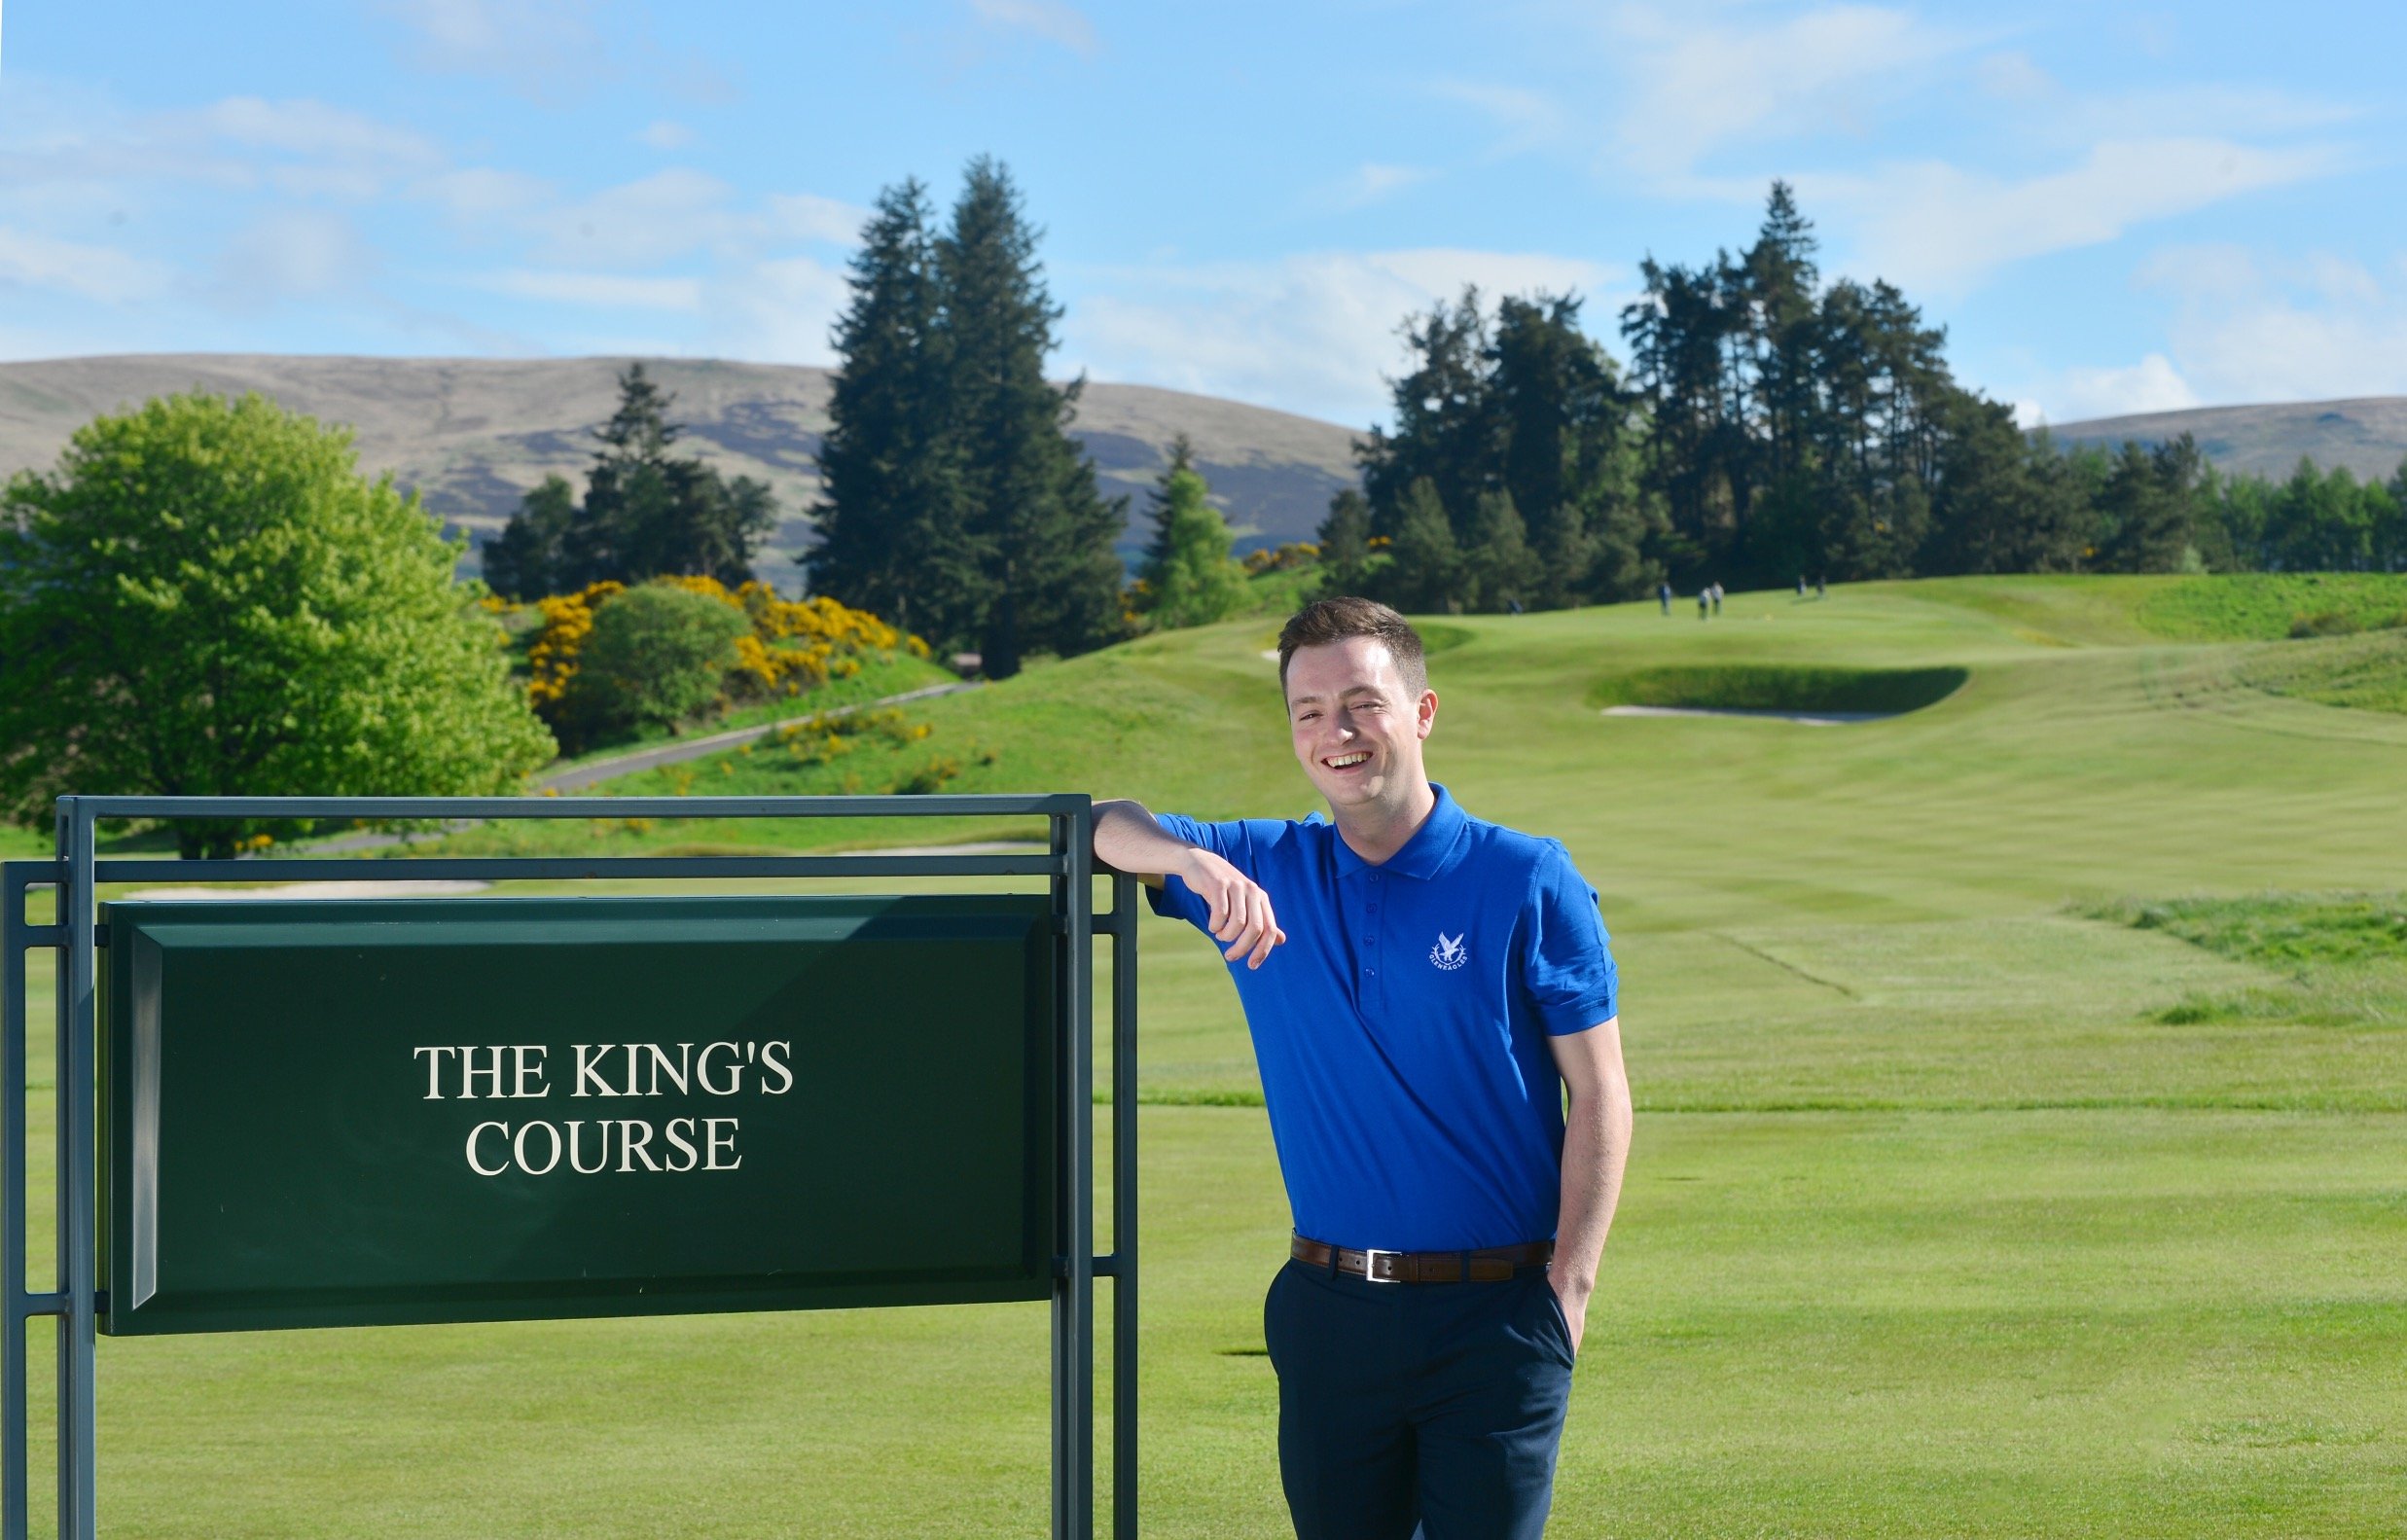 Golf Sales Manager at the Gleneagles Hotel